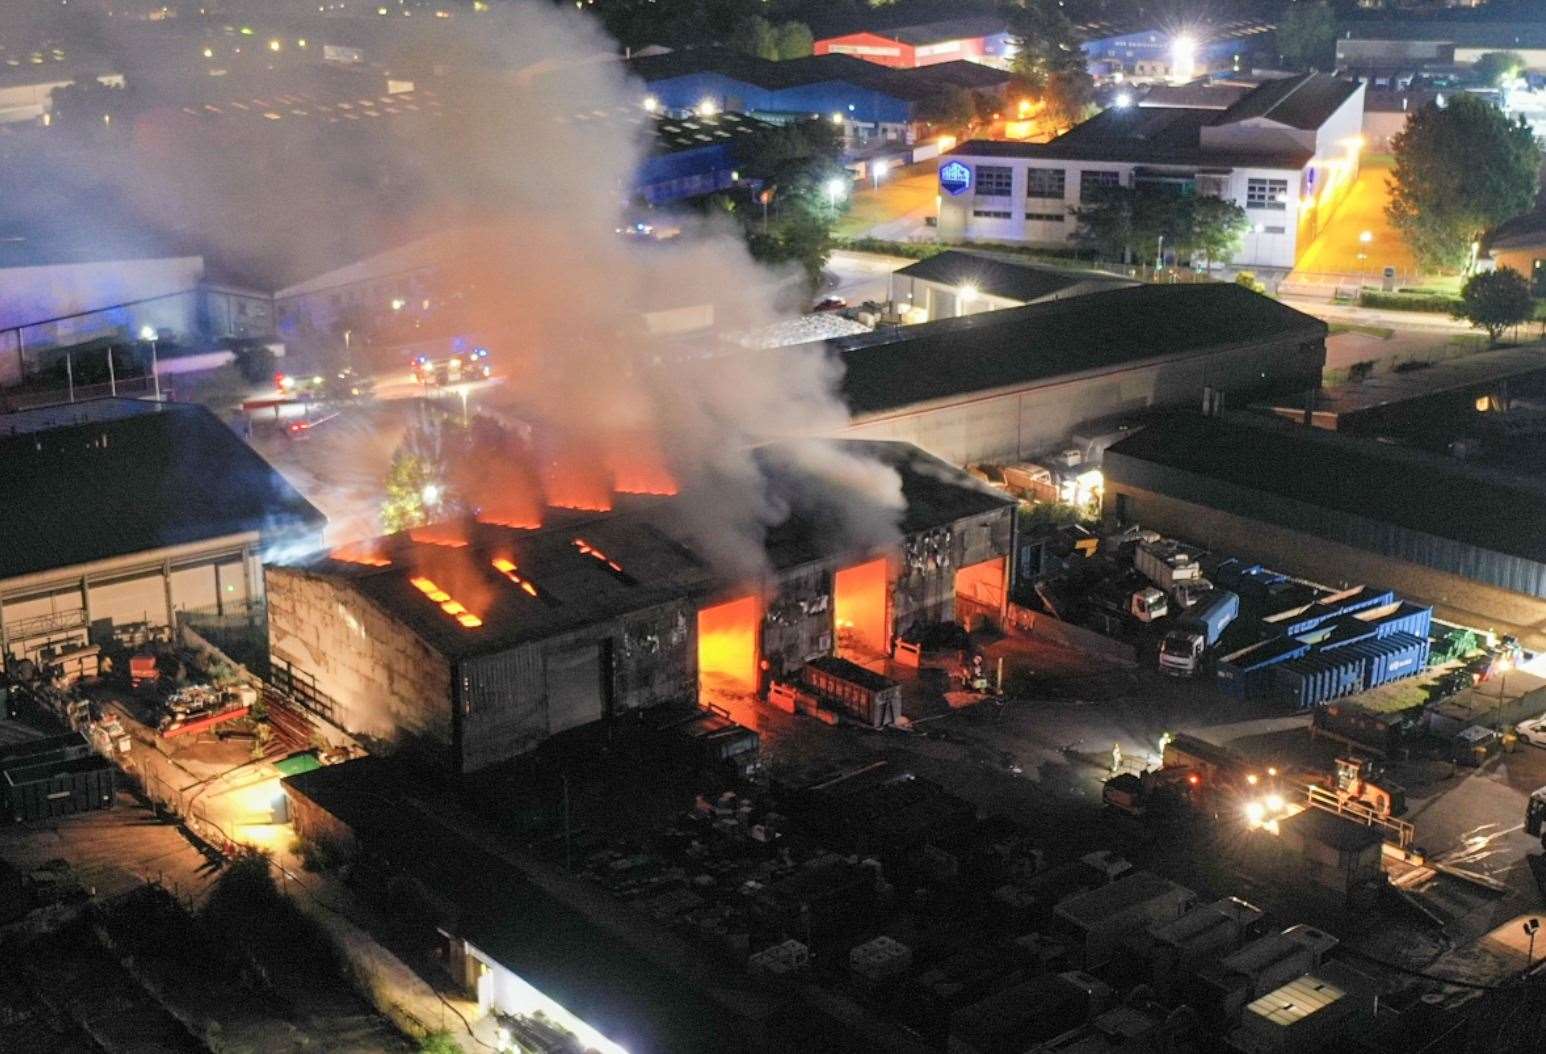 The blaze engulfed the site at the Eurolink Industrial Estate. Picture: UKNIP